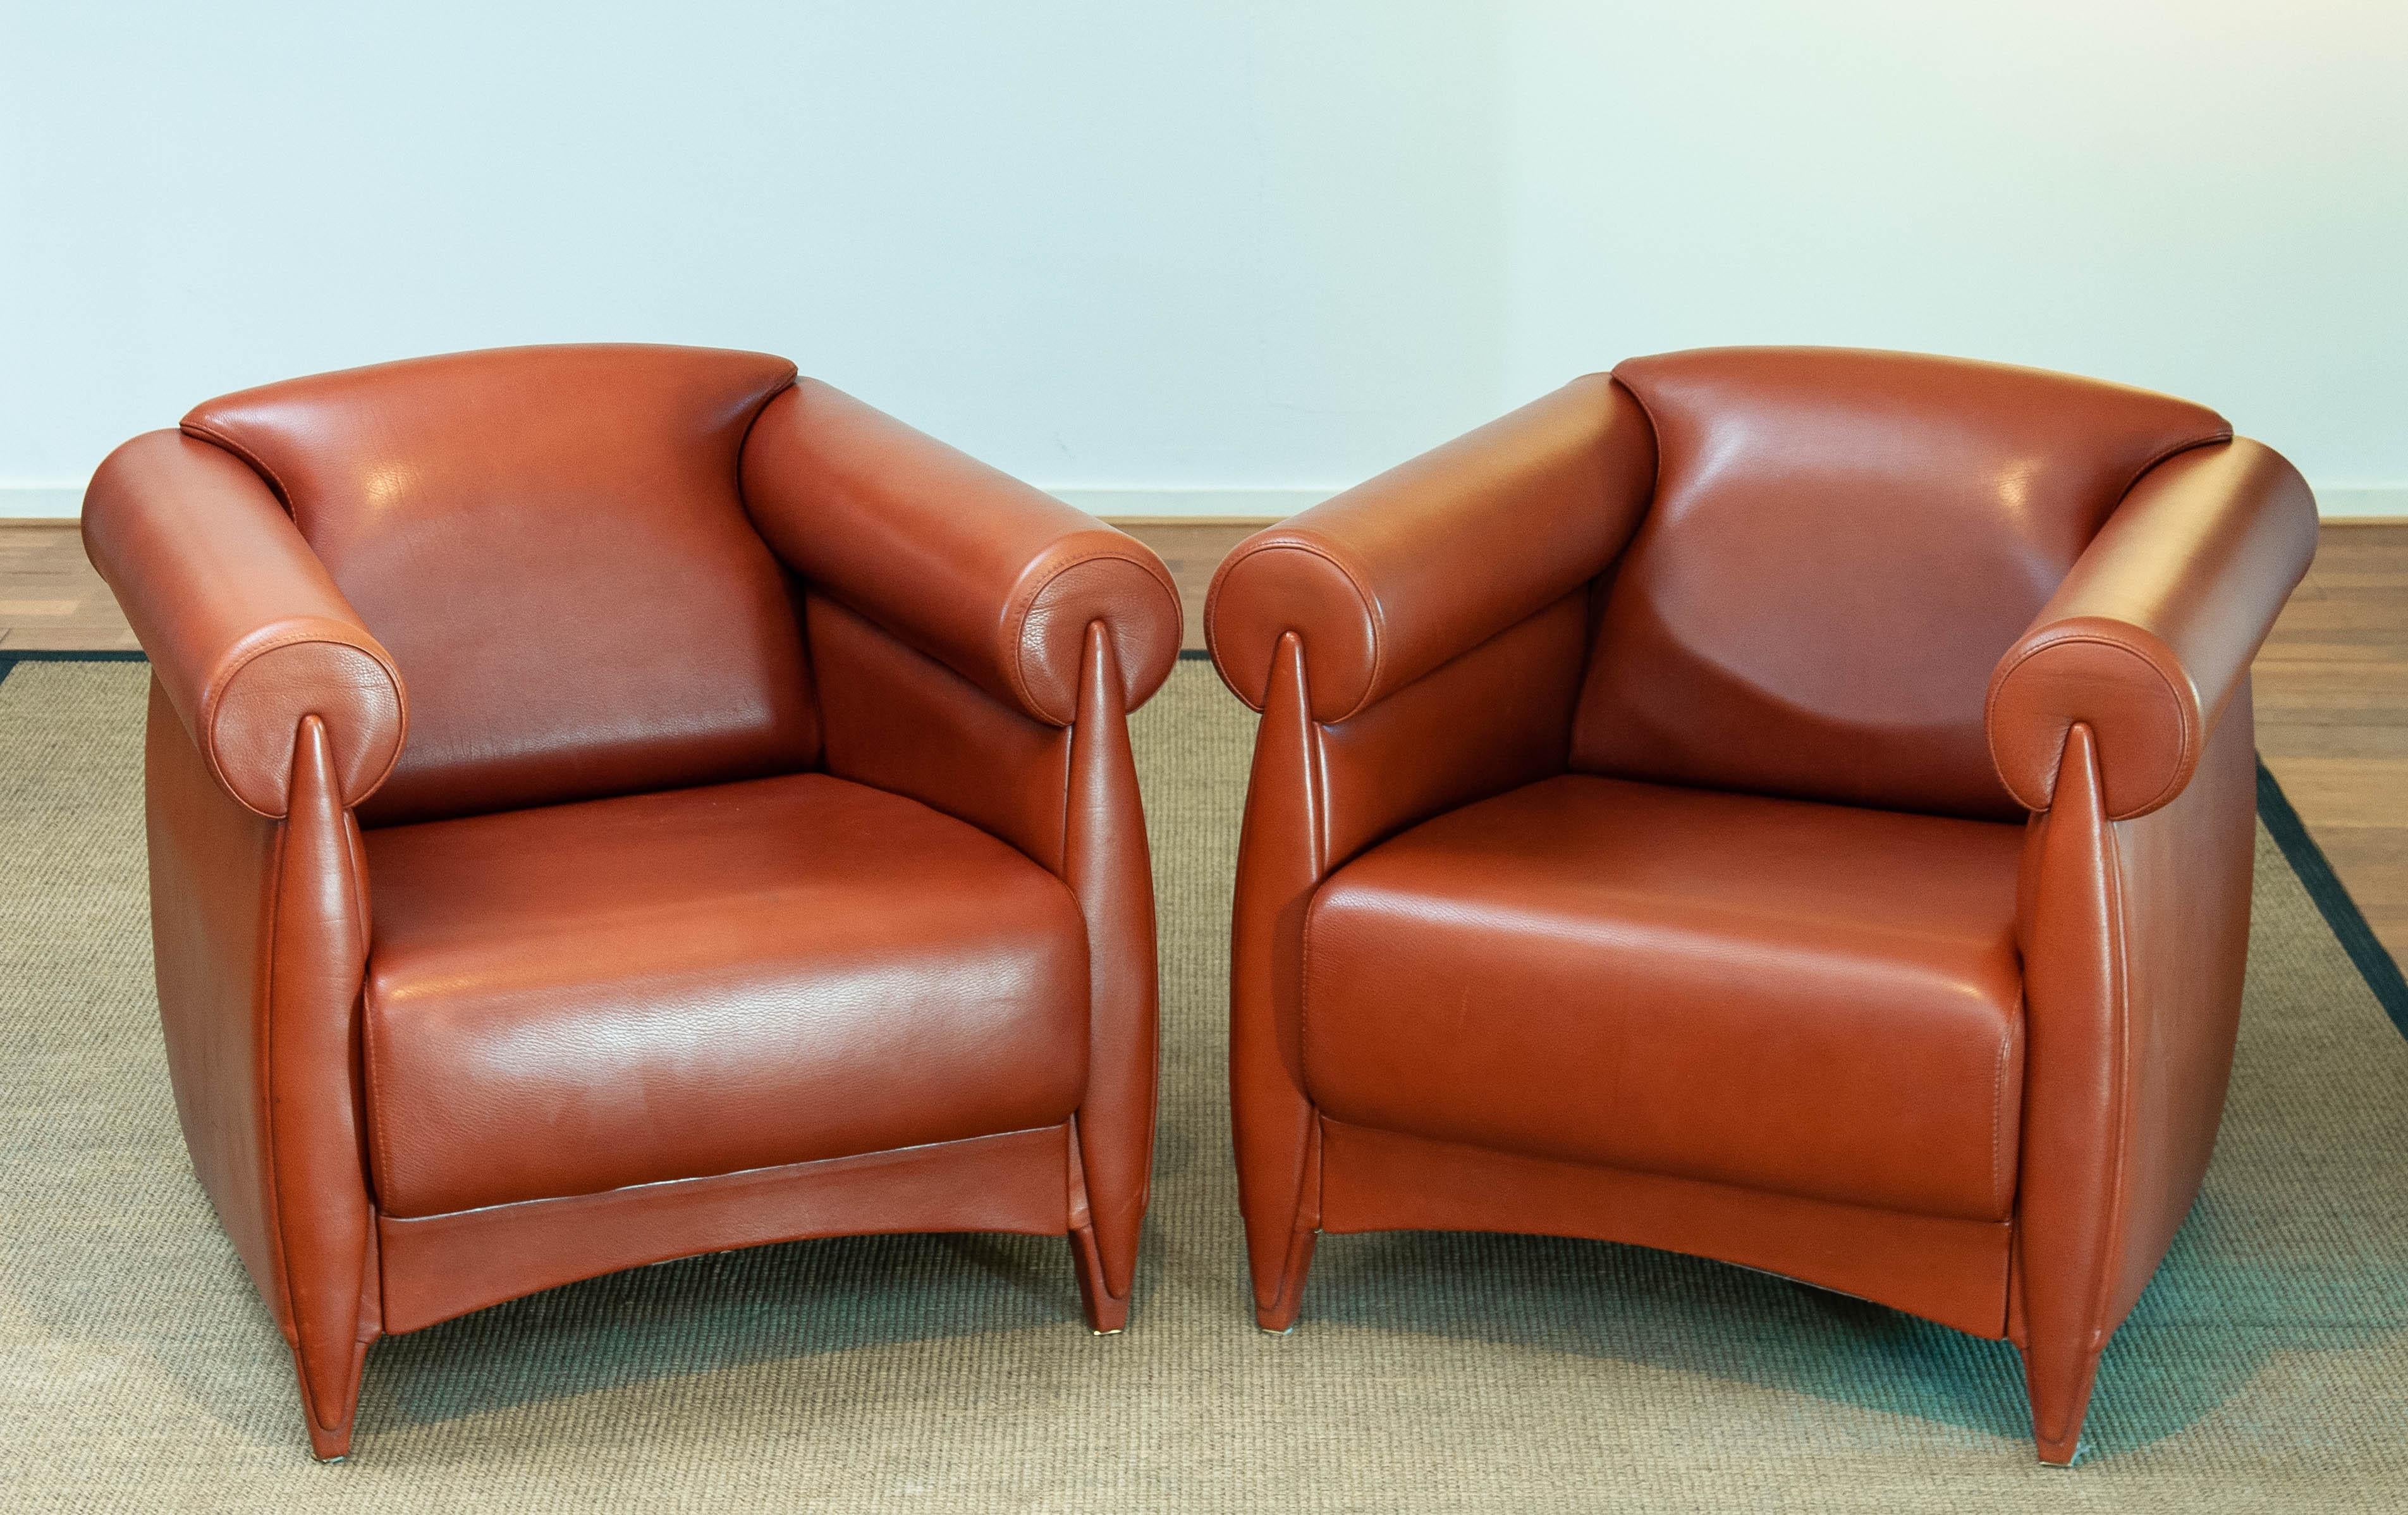 1980s Modern Pair Lounge / Club Chairs In Cognac Leather By Klaus Wettergren For Sale 6